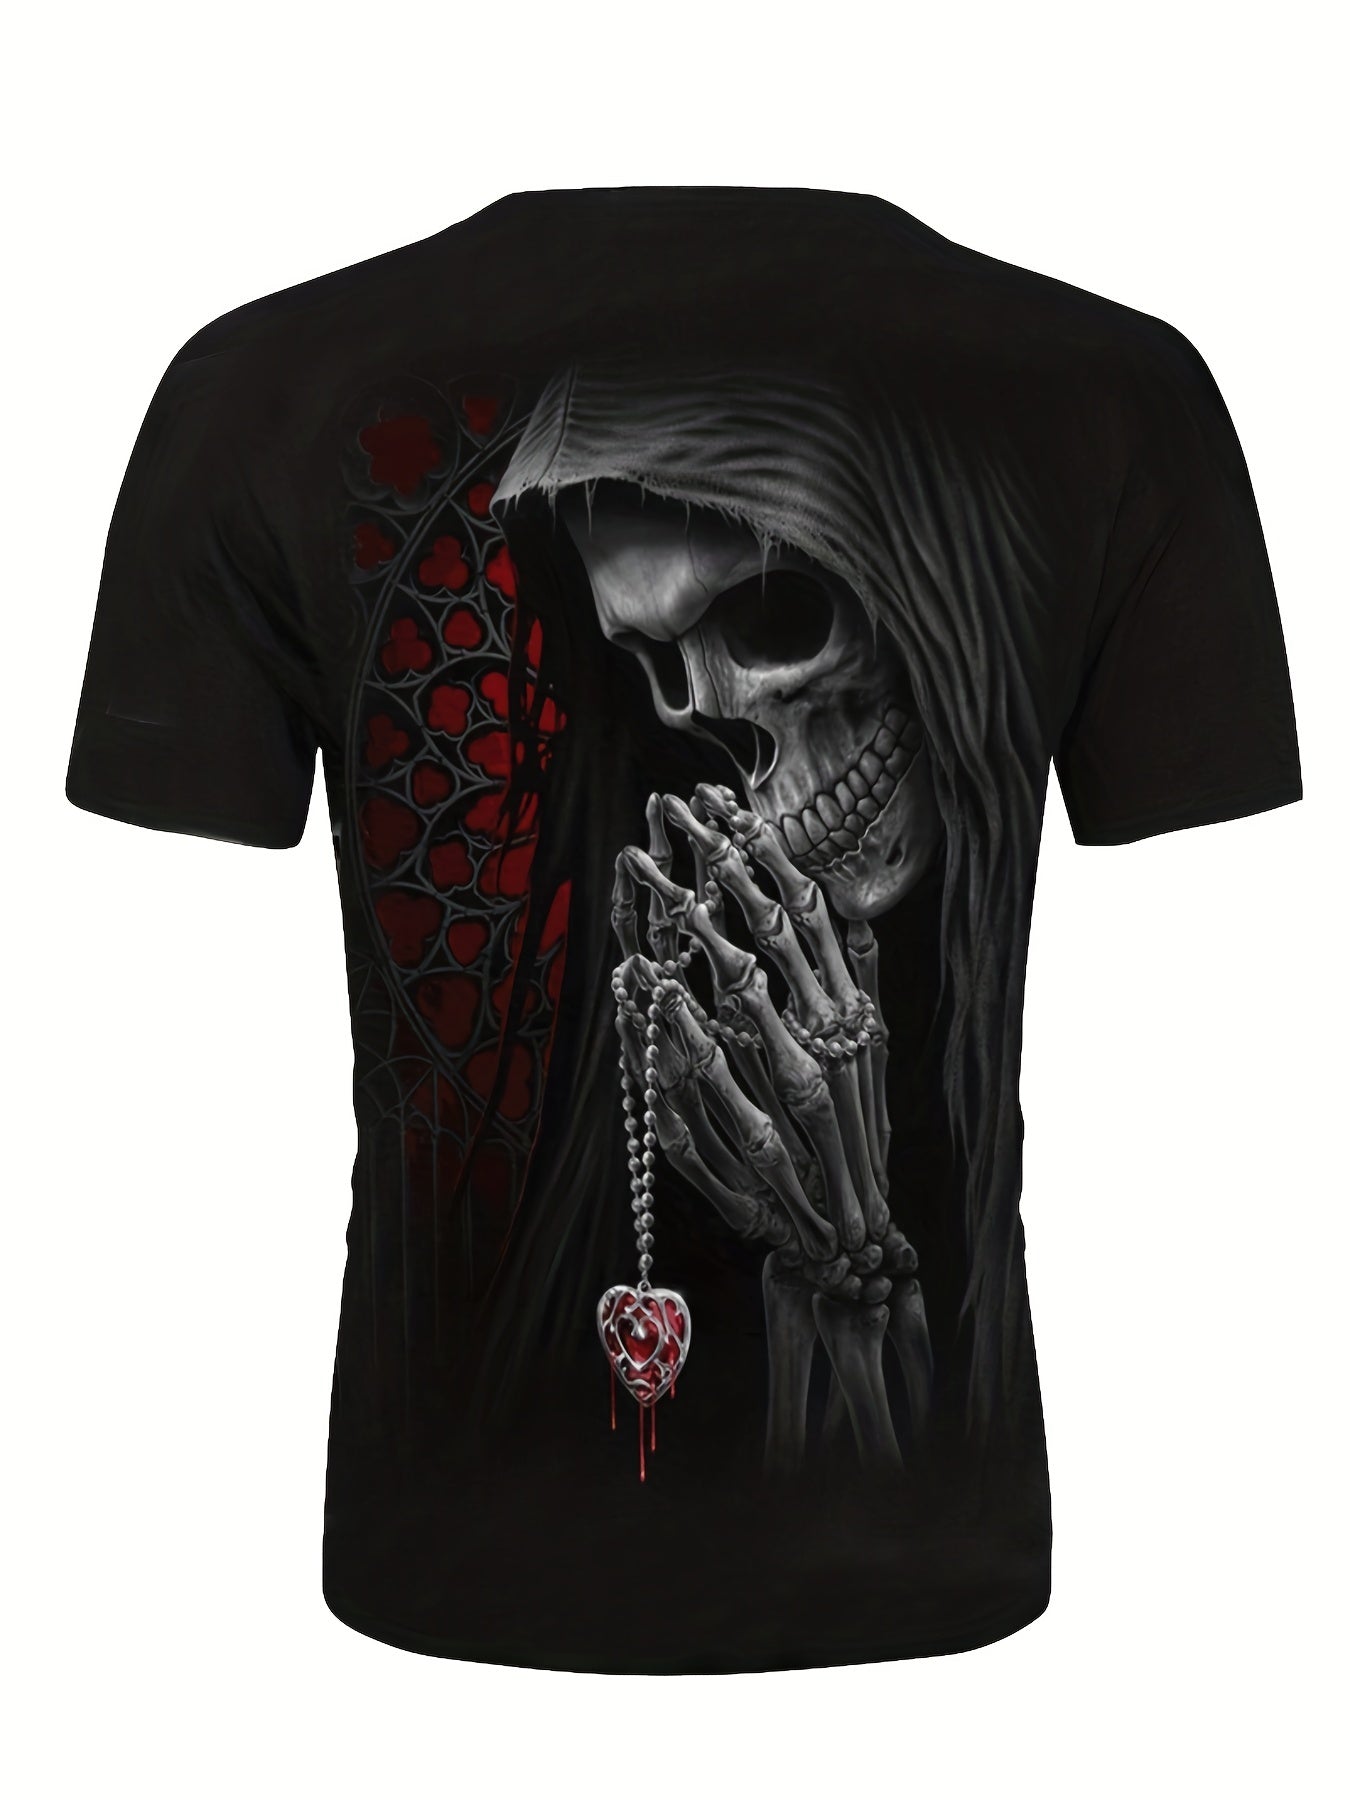 Stylish 3D Digital Beauty & Skeleton Pattern Print Graphic T-shirts, Causal Tees, Short Sleeves Comfortable Pullover Tops, Men's Summer Clothing